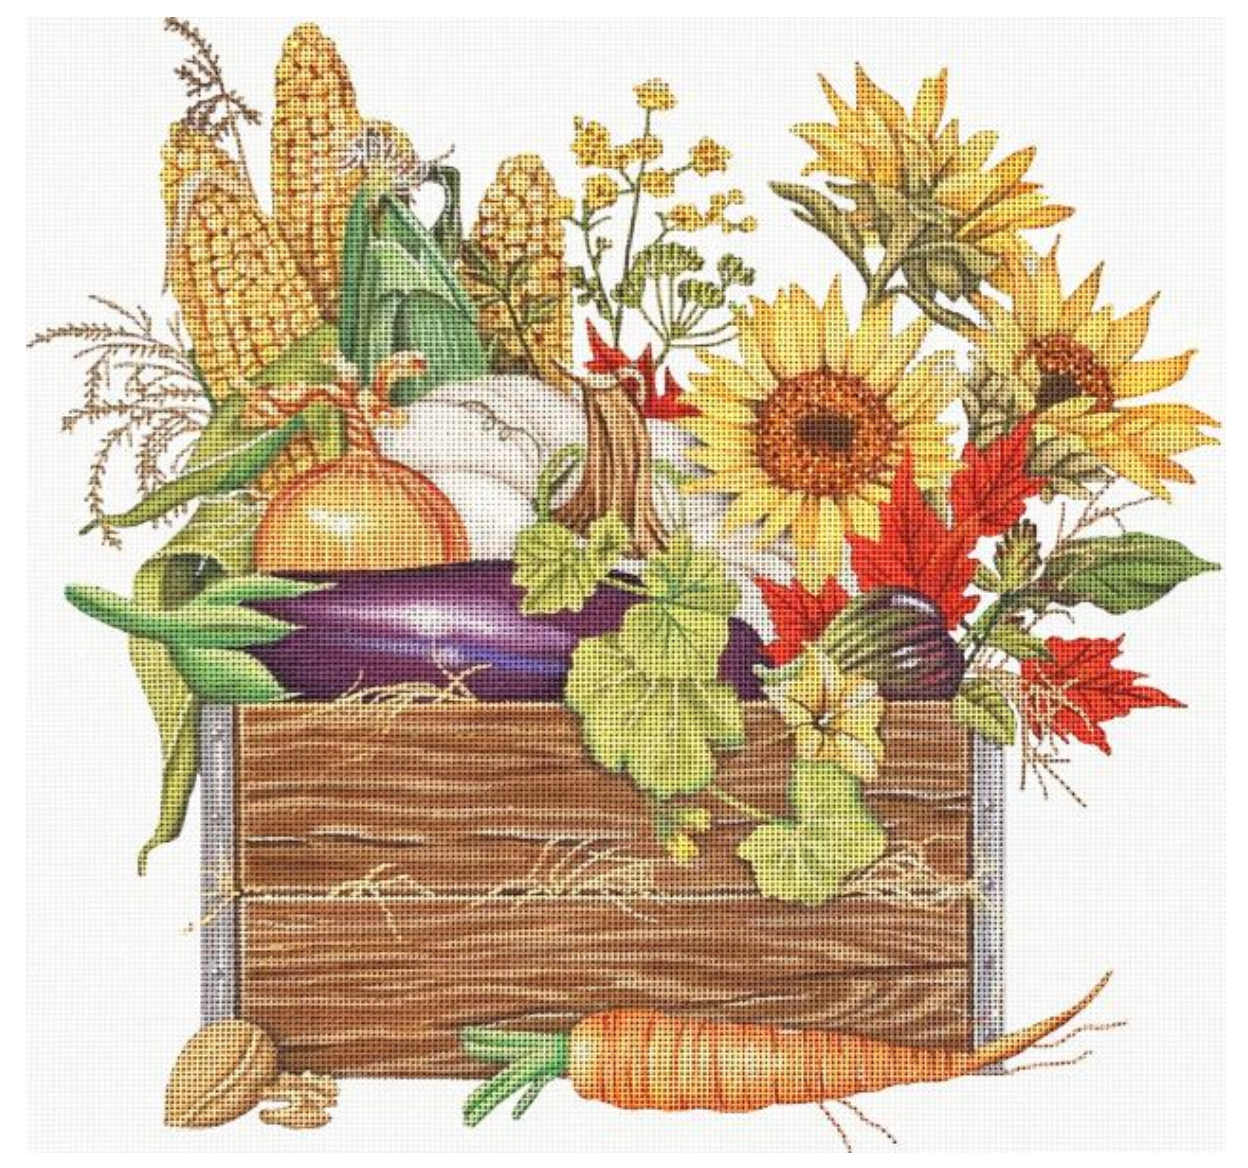 Mary Lake Thompson for Melissa Shirley needlepoint canvas of a wooden crate/box filled with vegetables and sunflowers (corn, onions, eggplant, a fig and a pumpkin). There is a carrot and a walnut on the ground in front of the crate